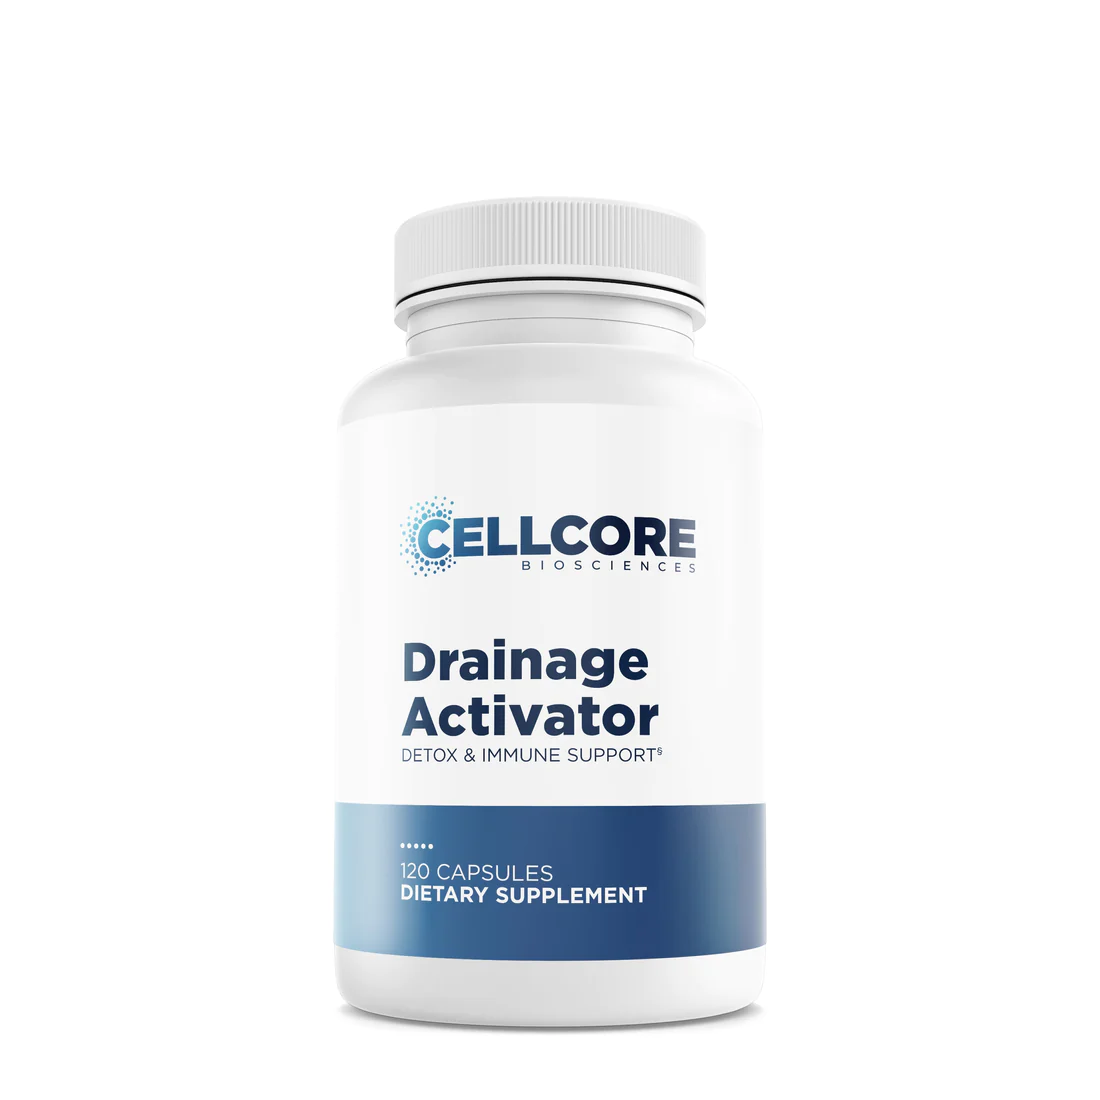 Drainage Activator by CellCore extracellular matrix drainage support